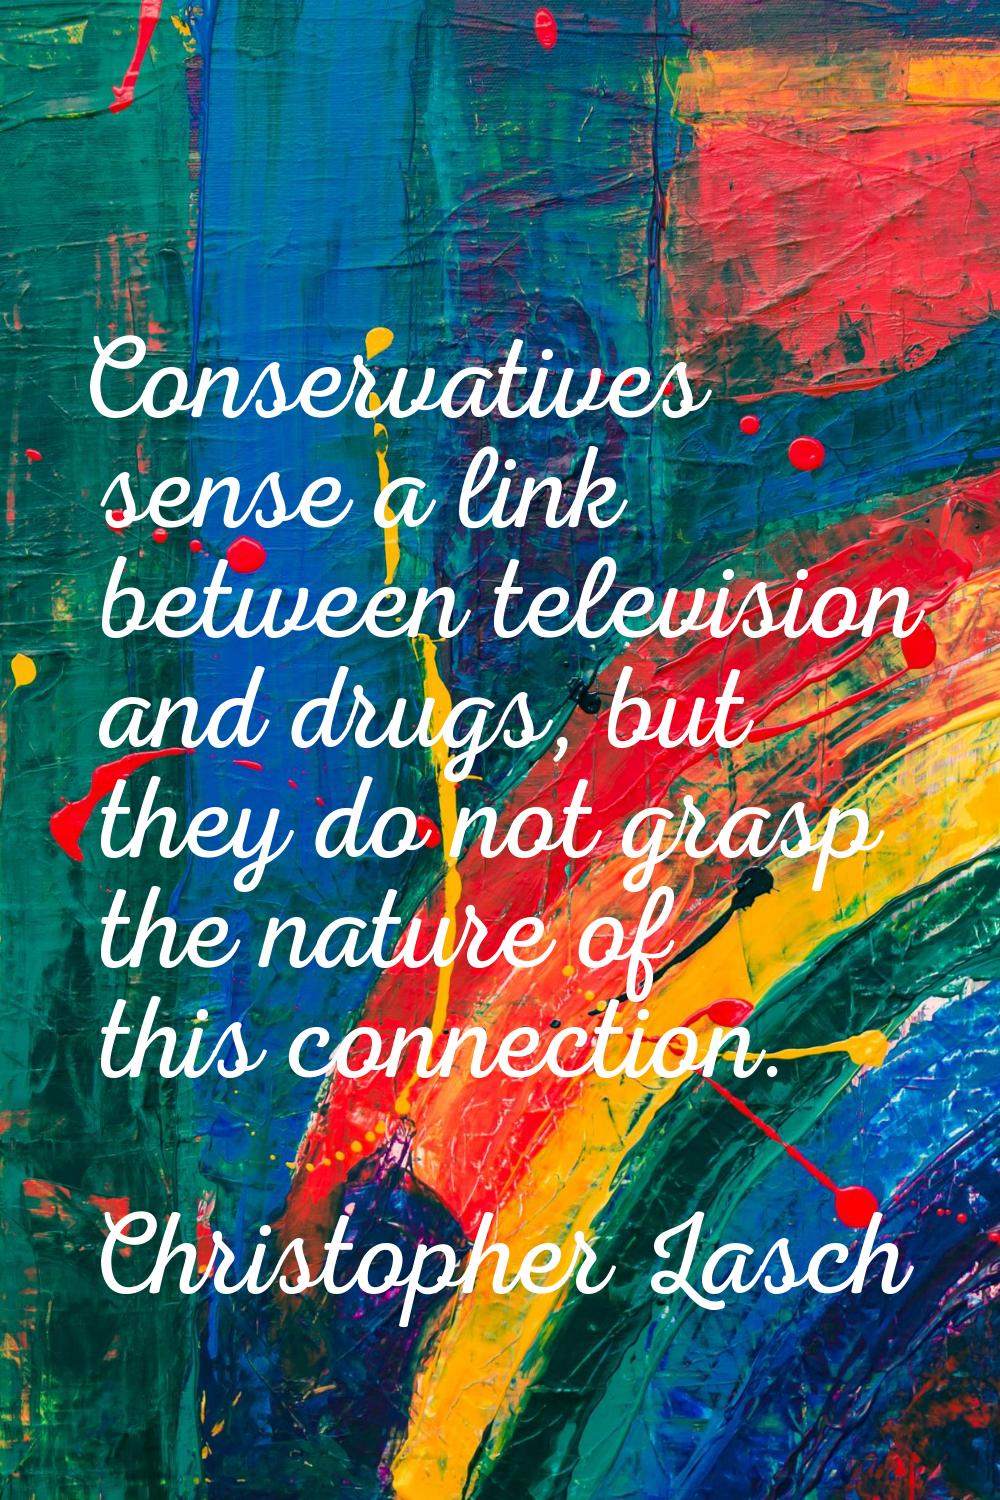 Conservatives sense a link between television and drugs, but they do not grasp the nature of this c